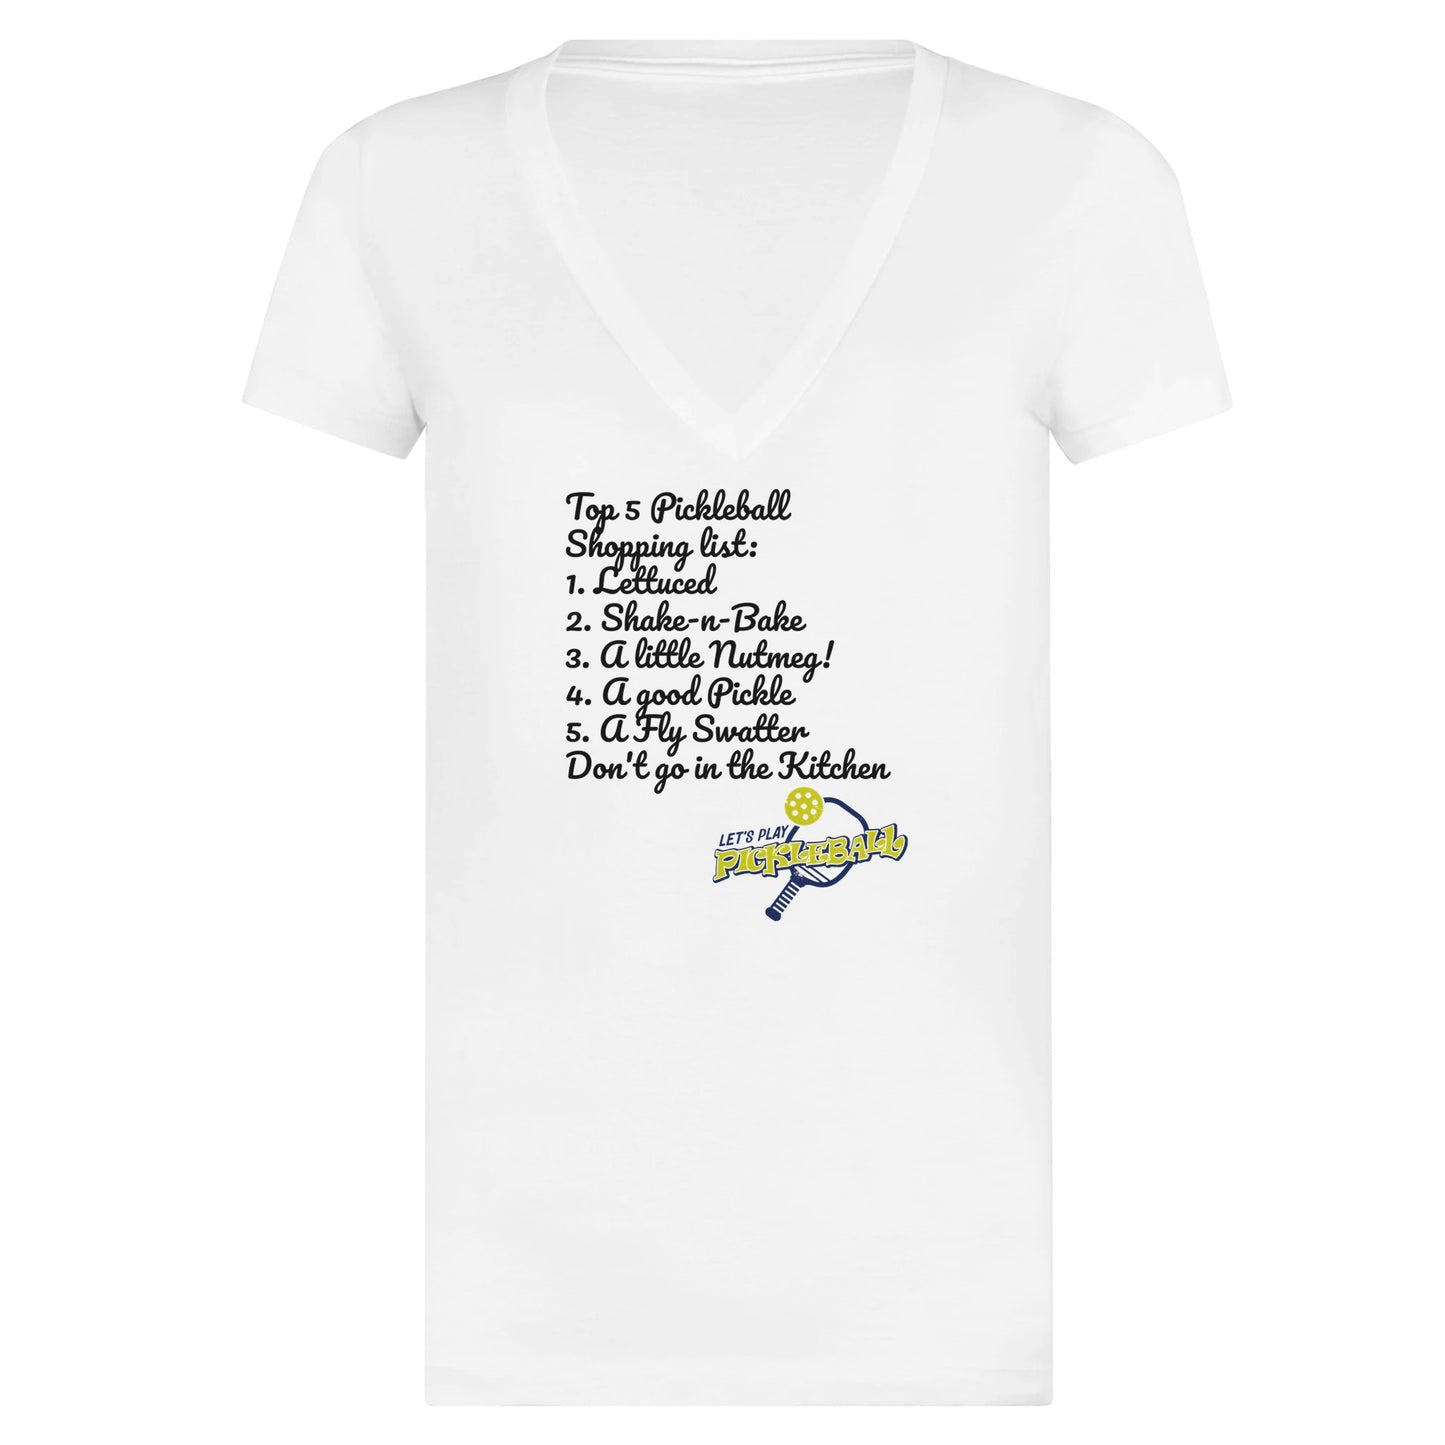 Original motto Top 5 PickleBall list premium women’s V-neck t-shirt from WhatYa Say Apparel made from combed and ring-spun cotton lying flat.